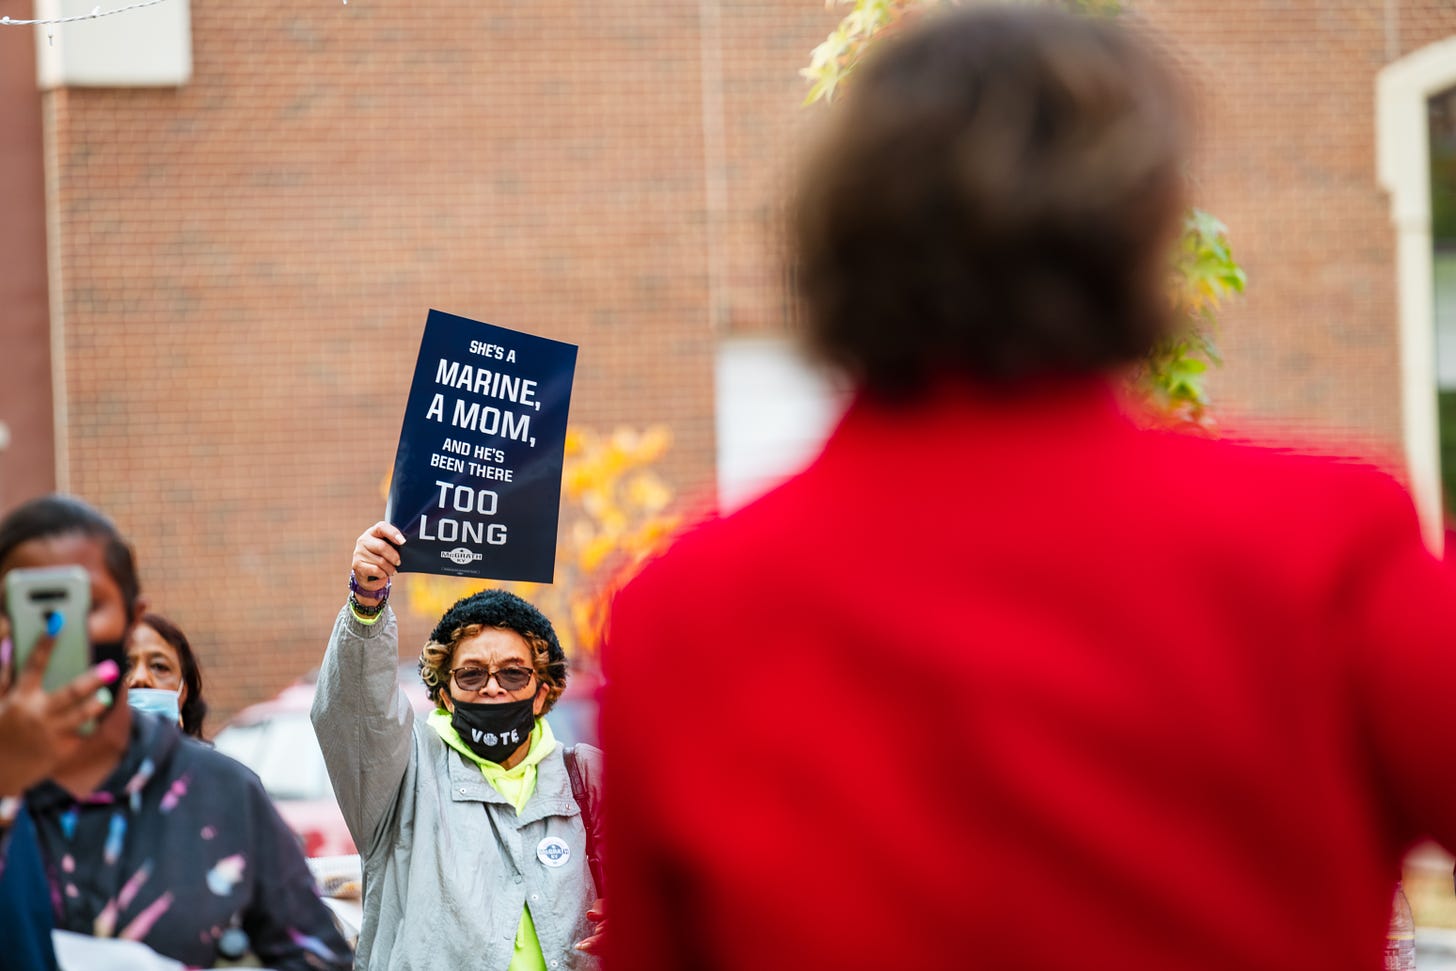 LOUISVILLE, KY - OCTOBER 17: A woman waves her sign in support of Amy McGrath, Kentucky Democratic Senate Candidate, as McGrath addresses constituents at the Early Vote Cookout at a local restaurant on October 17, 2020 in Louisville, Kentucky. Amy McGrath aims to unseat Senate Majority Leader Mitch McConnell in 2020 general election. (Photo by Jon Cherry/Getty Images)